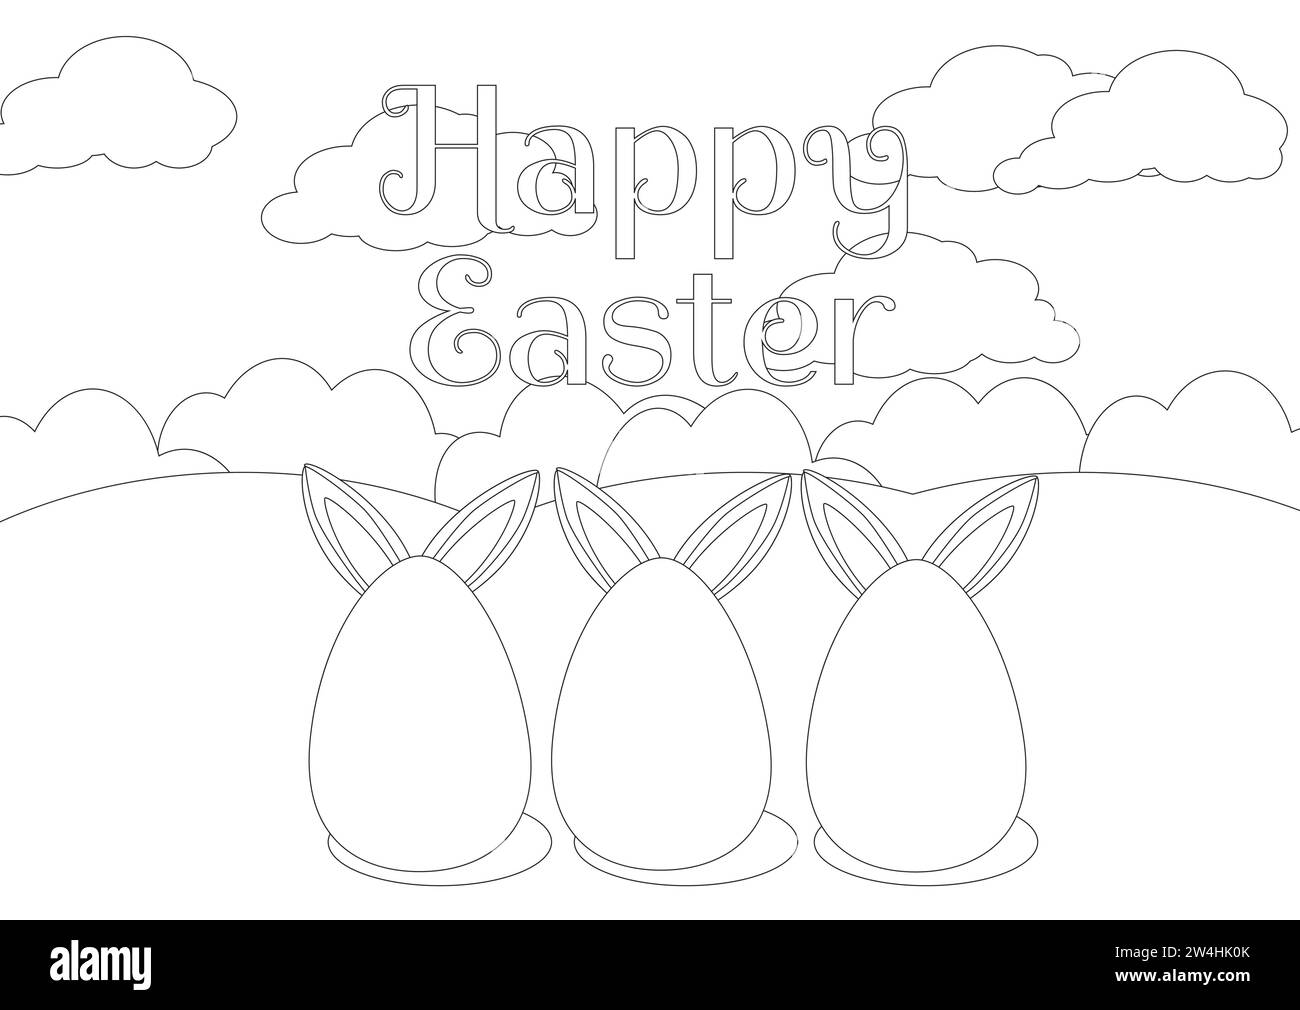 Coloring page. Close-up of painted eggs on green grass with rabbit ears sticking out behind the eggs. Horizontal banner with green meadow and blue sky Stock Vector